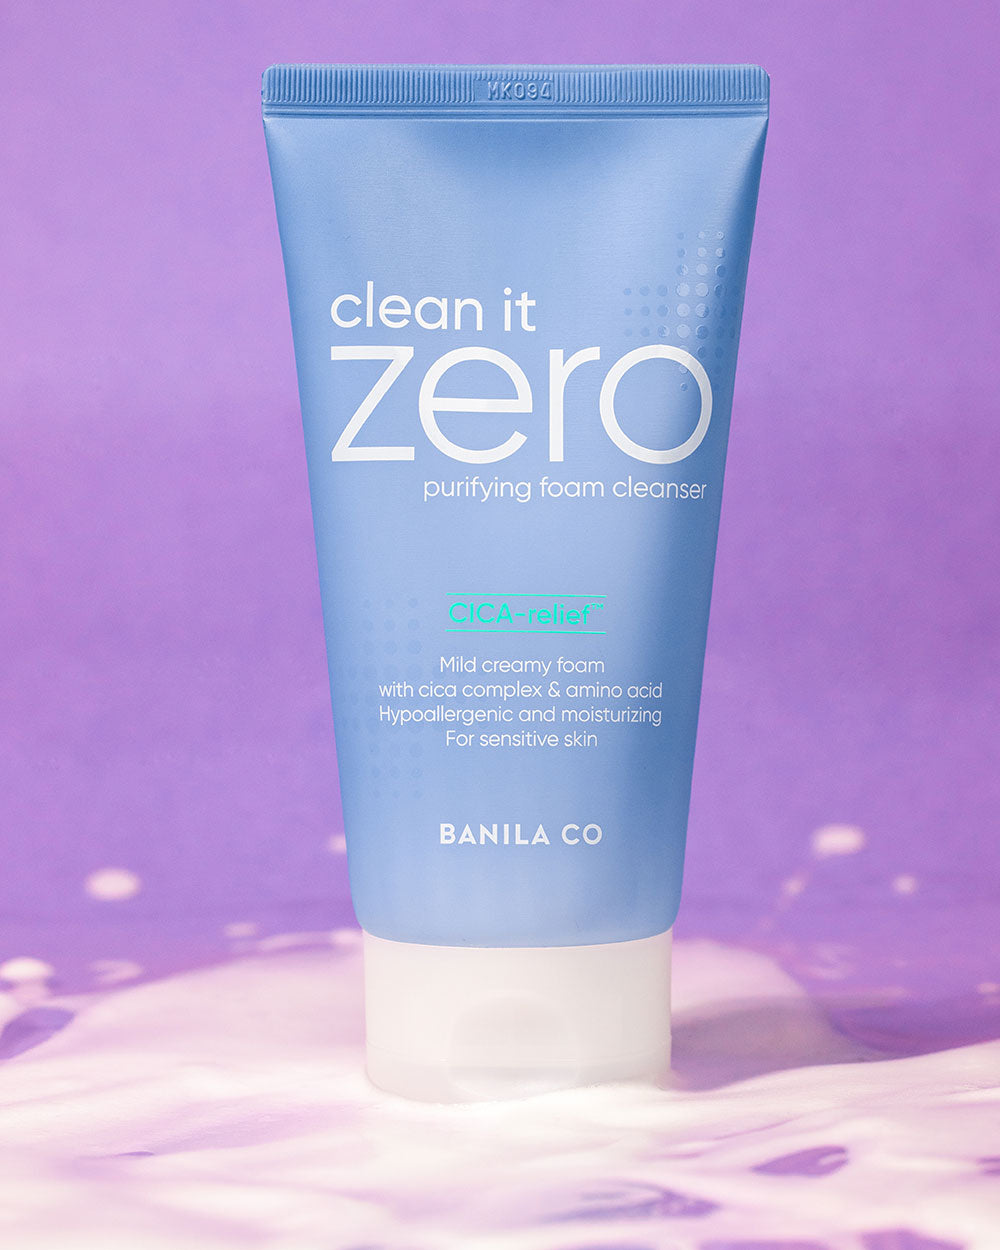  BANILA CO Clean It Zero Purifying Foam Cleanser, Foaming K  Beauty Face Wash, Sensitive Skin Relief with CICA, Removes Make Up, No  Sulfates or Parabens : Beauty & Personal Care